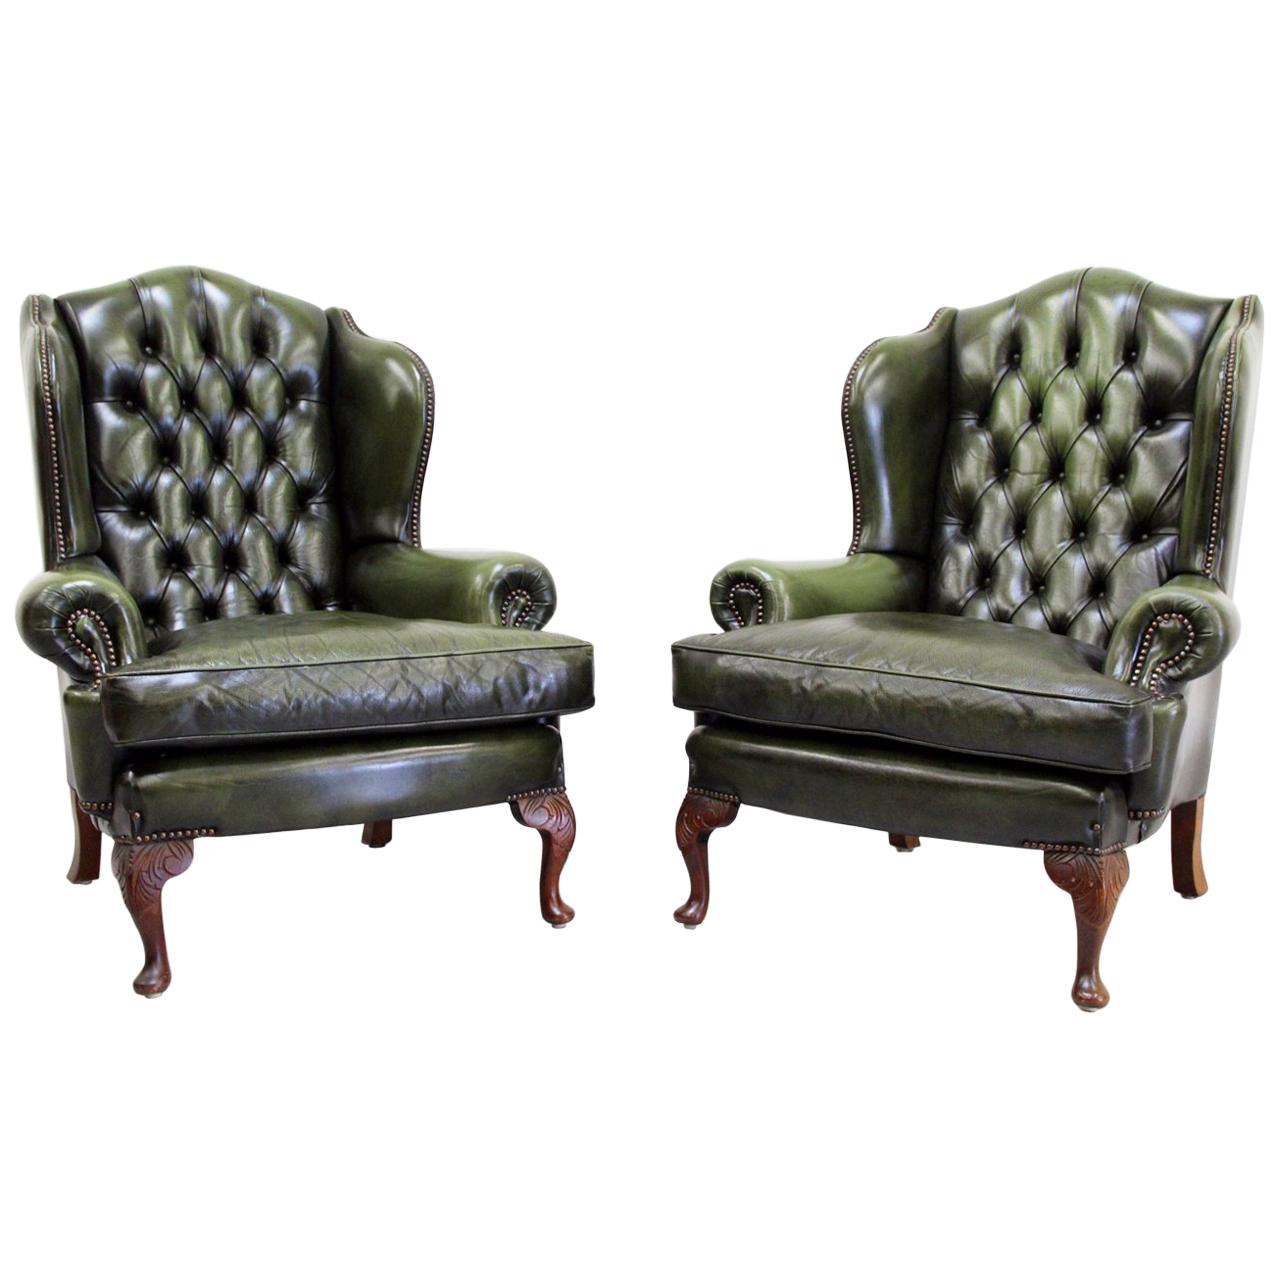 2 Chesterfield Wing Chair Armchair Recliner Antique For Sale